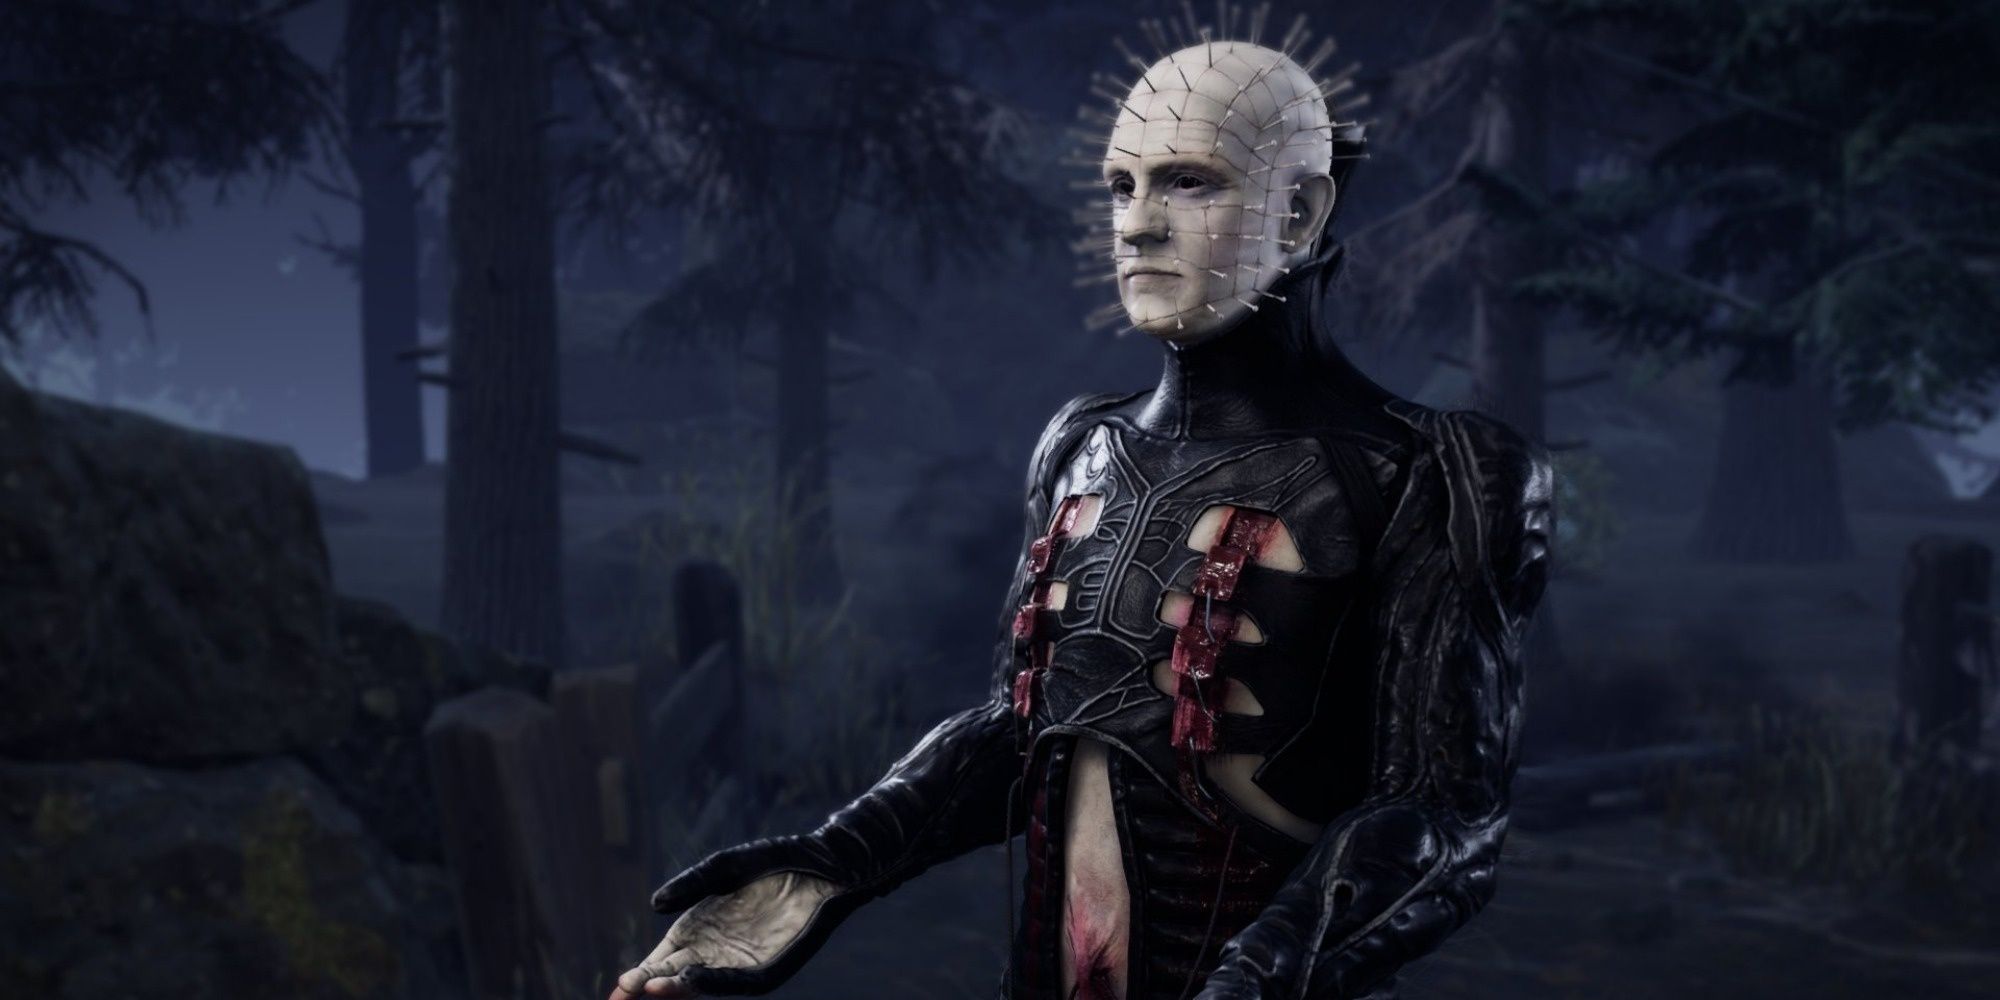 The Cenobite, aka Pinhead promotional image for Dead By Daylight